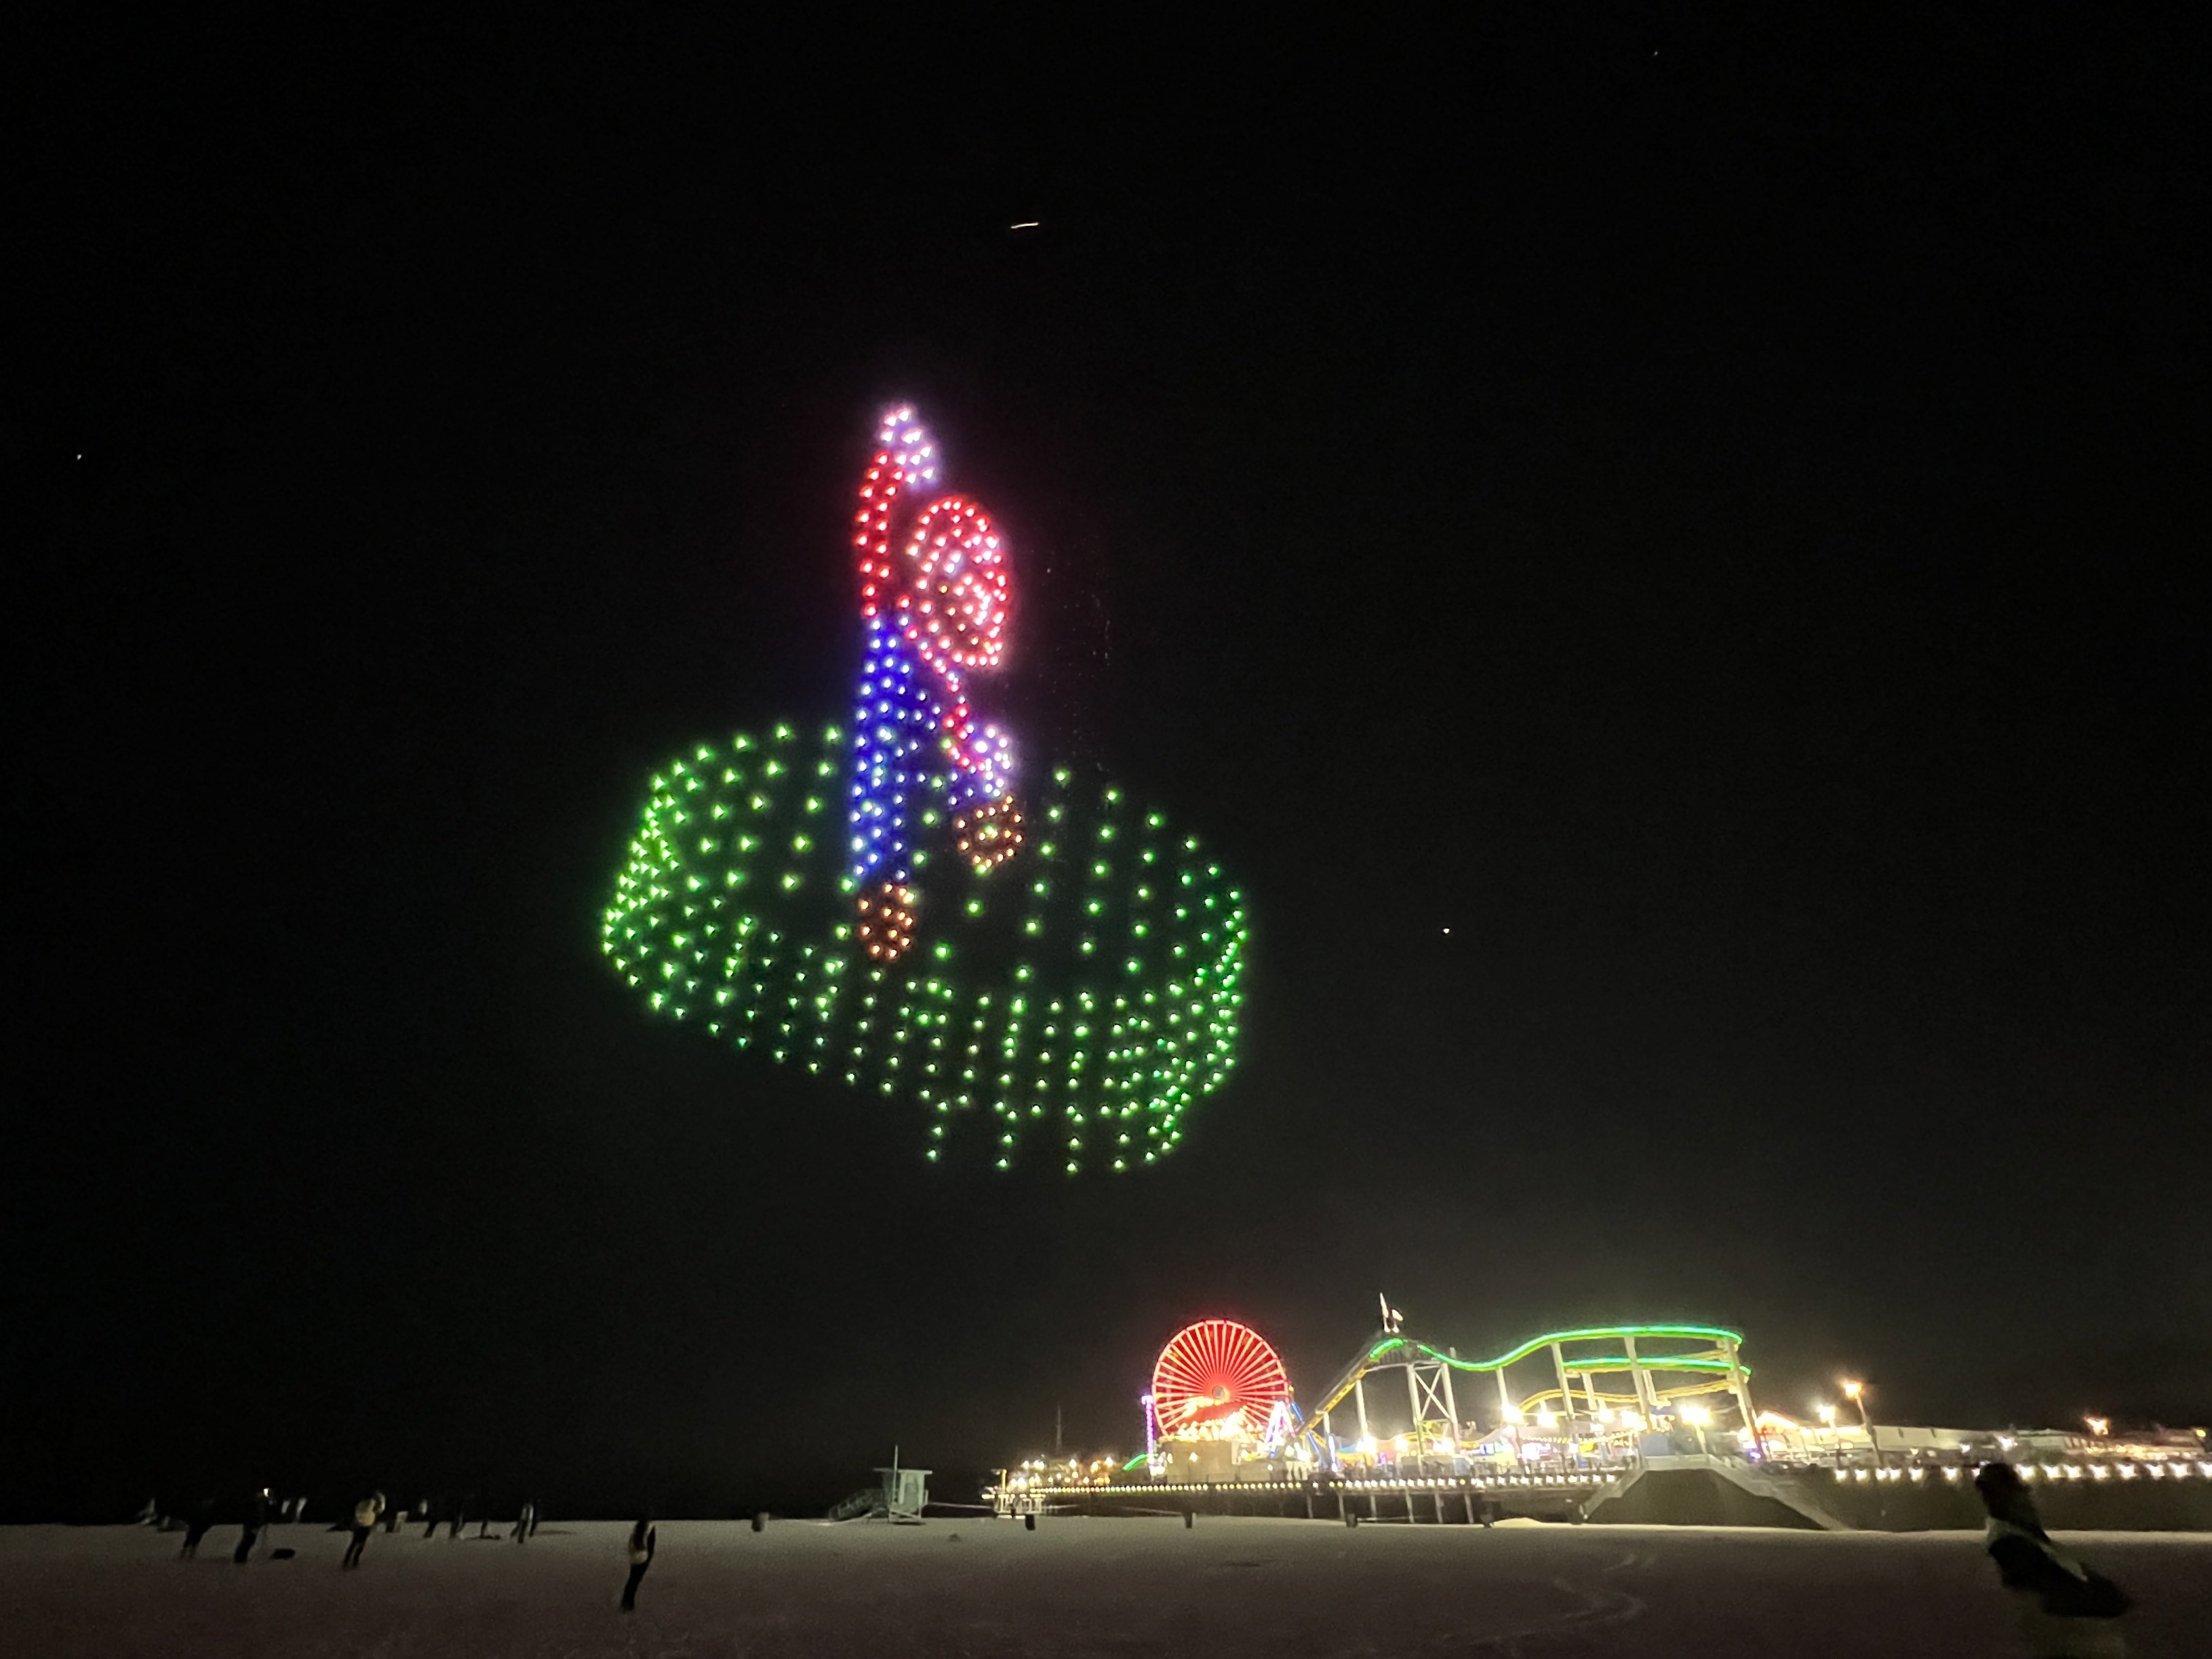 Attractions 360° on X: Wow! Saw an awesome Super Mario Bros drone show at  Santa Monica Pier promoting the movie. Pretty cool to see 600 drones  created Mario, Luigi & Bowsers! 🍄